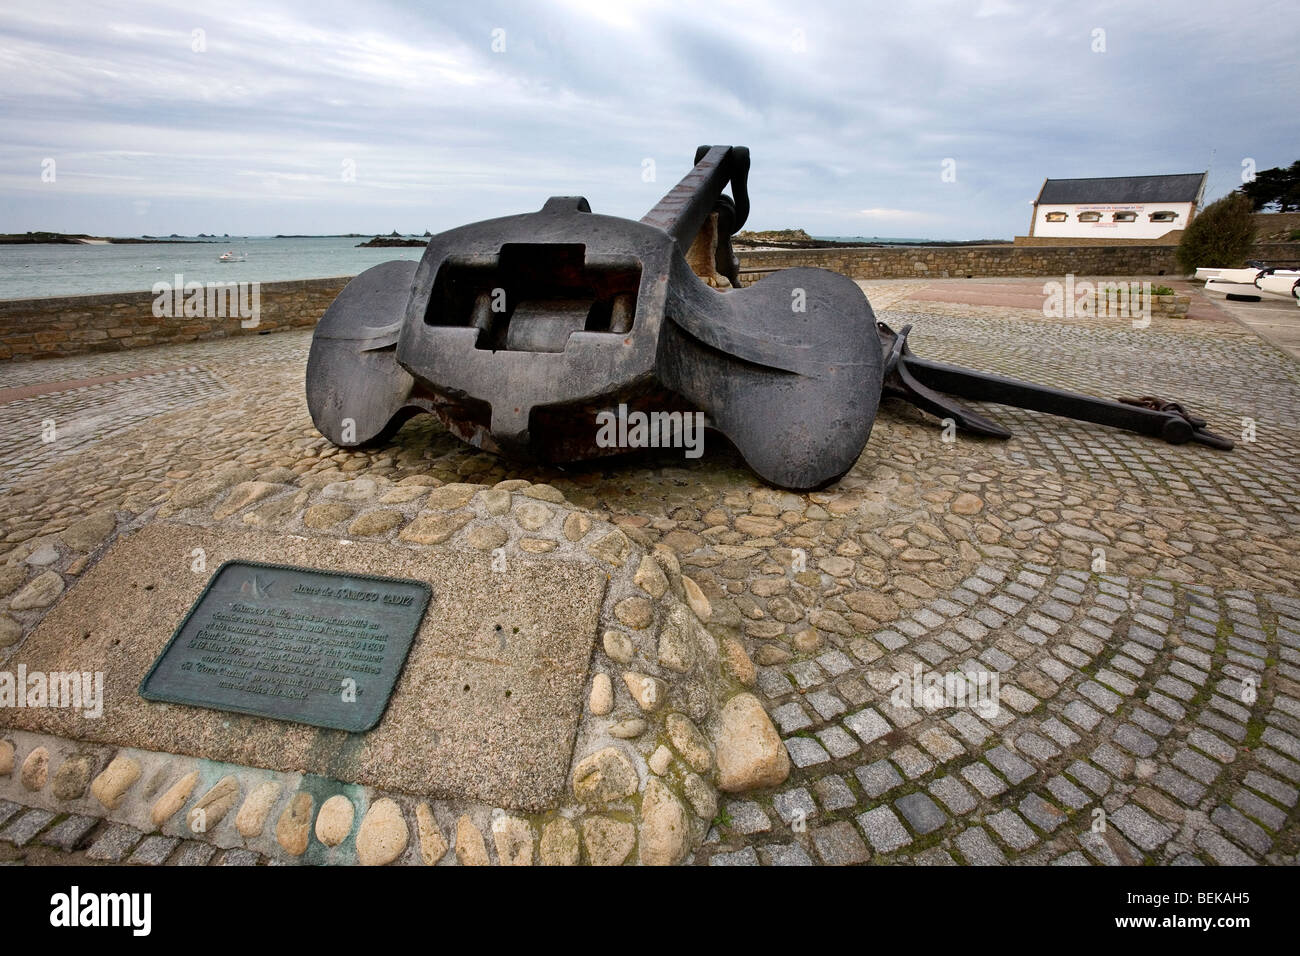 Anchor of the Amoco Cadiz oil tanker, wrecked in March 1978 at Portsall, Brittany, France Stock Photo